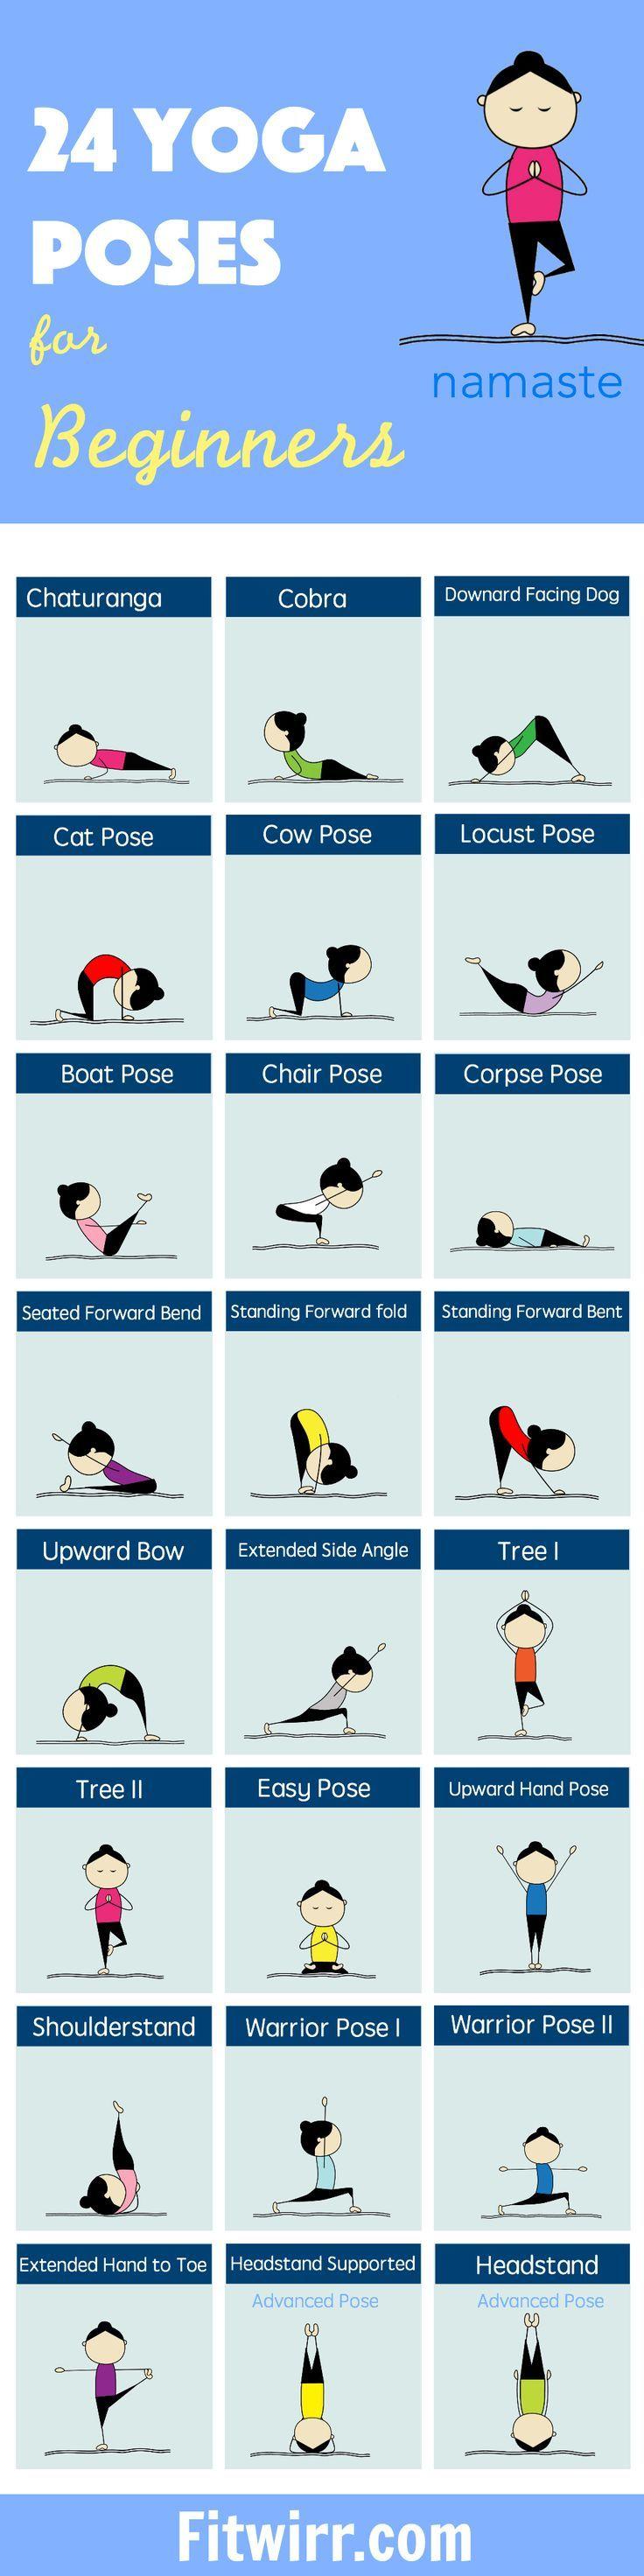 Hochzeit - 24 Yoga Poses For Beginners